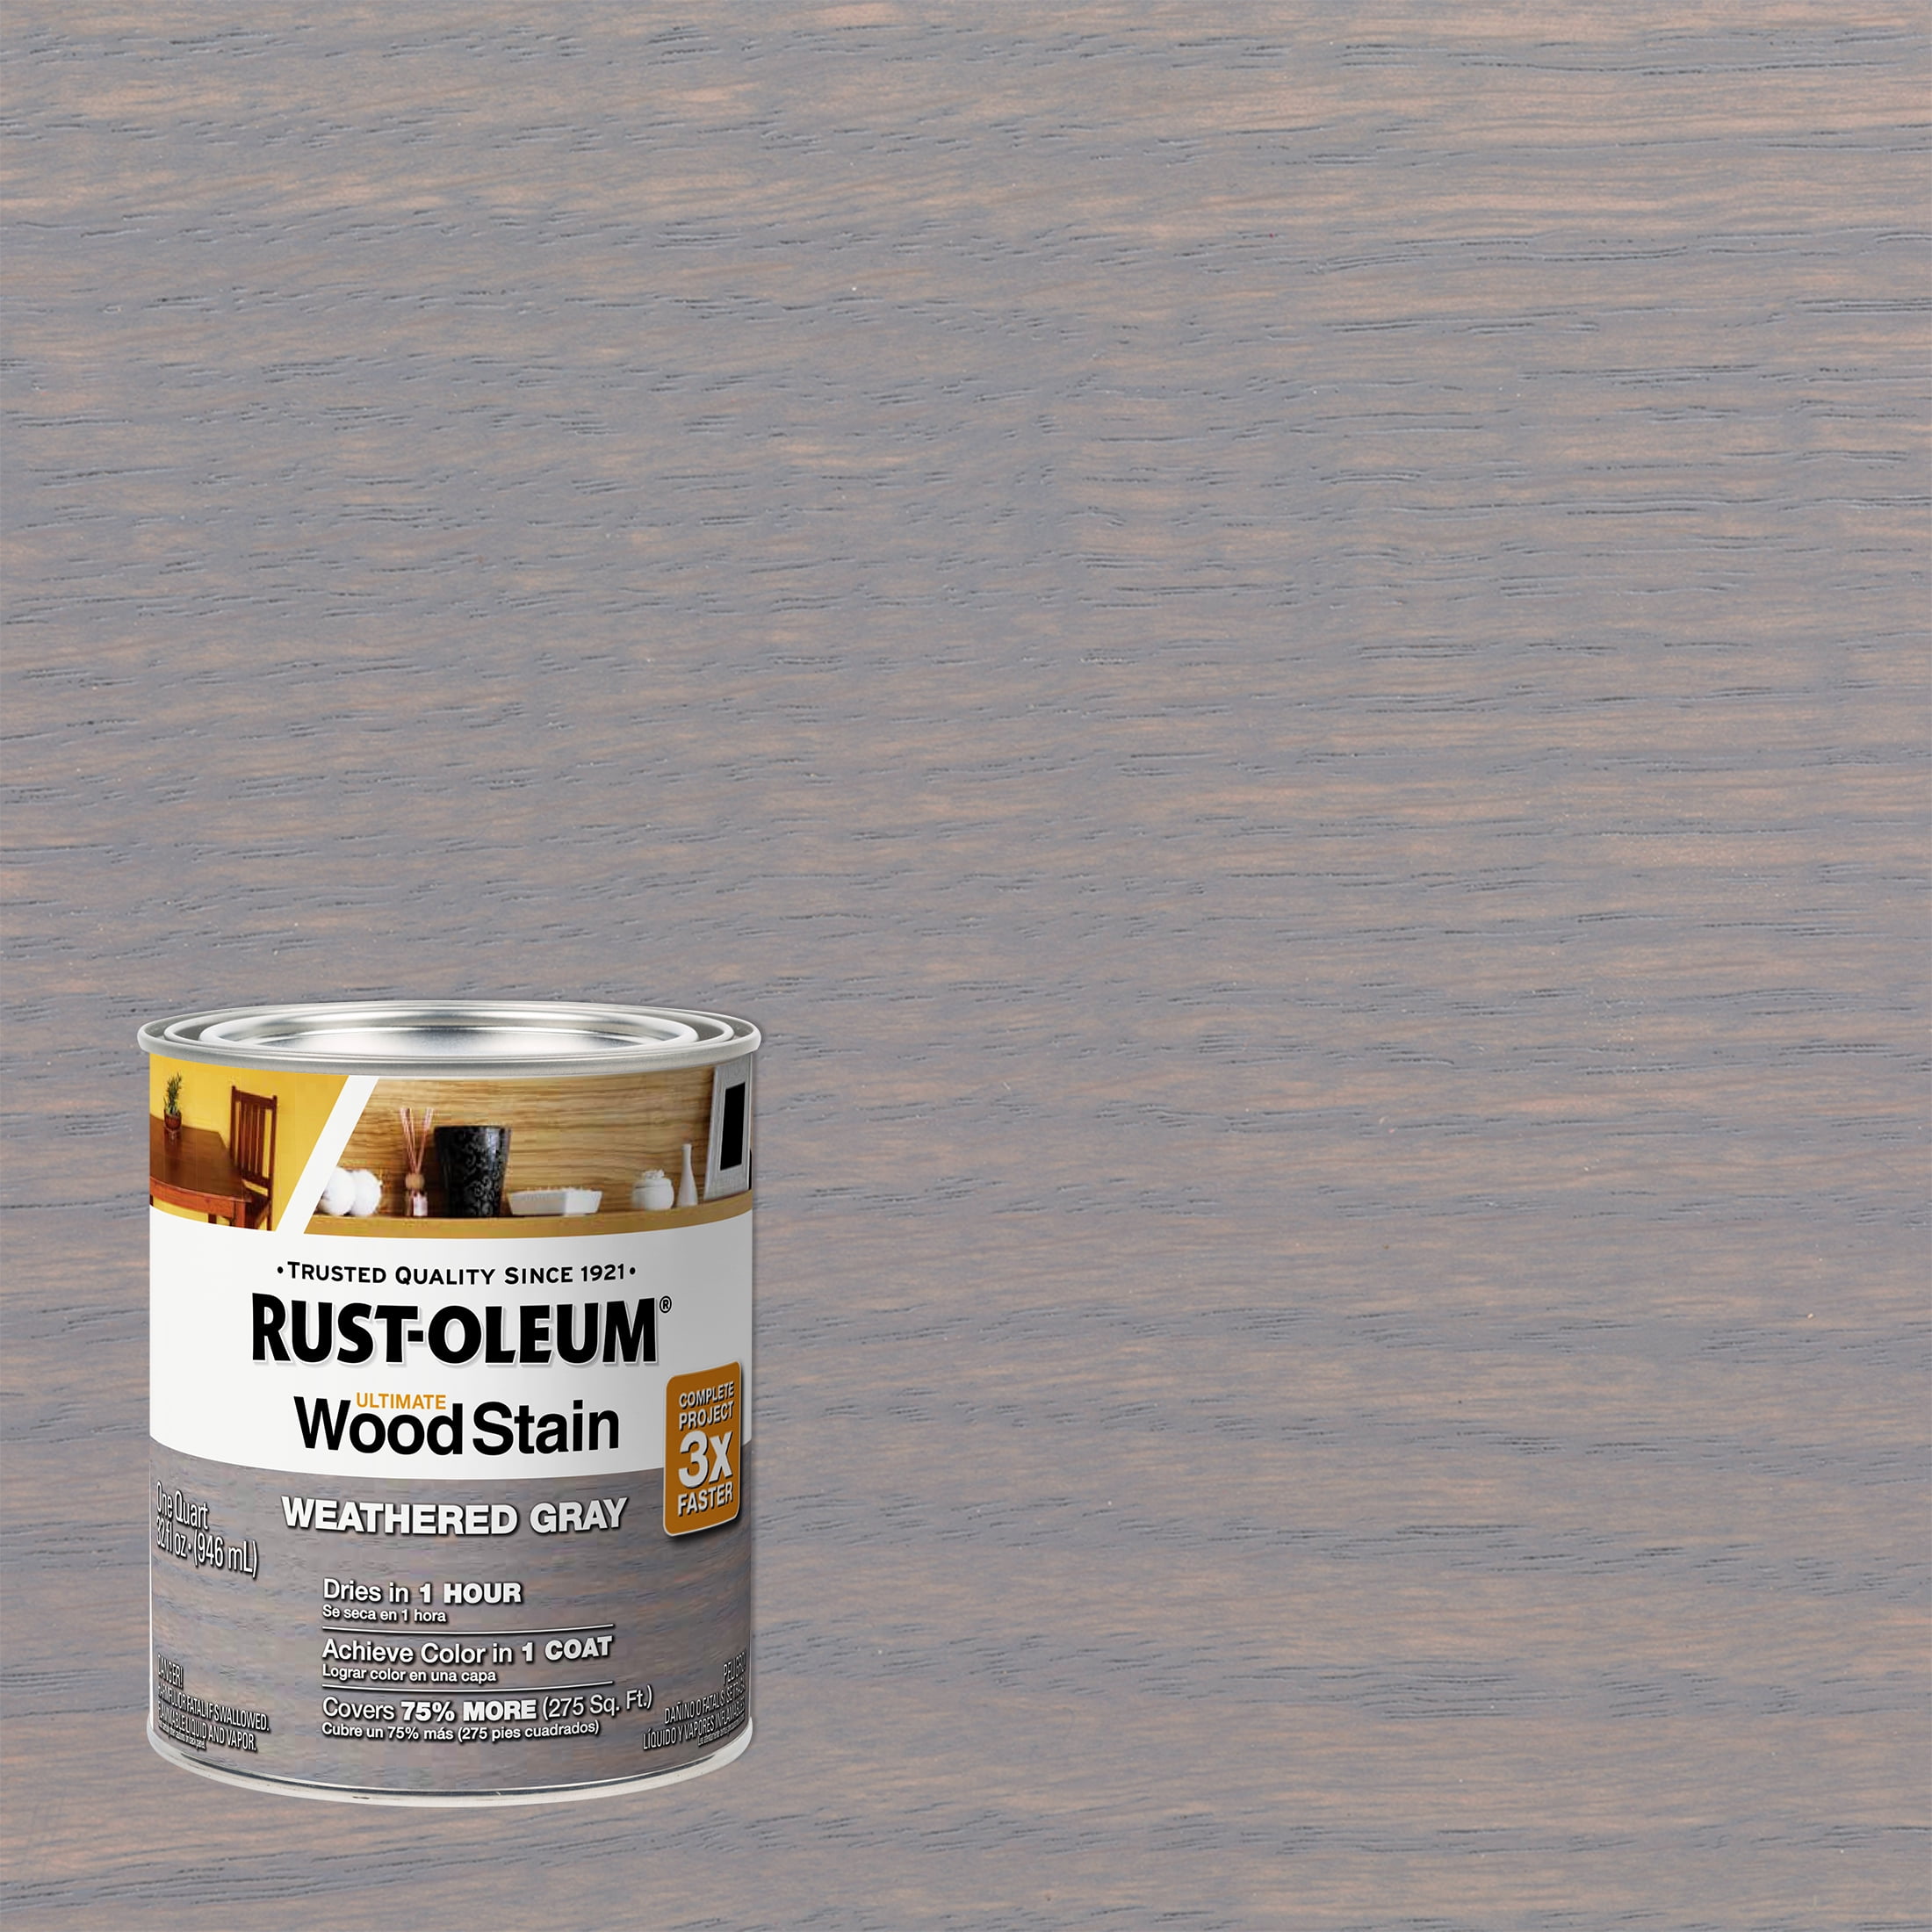 Weathered Gray, Rust-Oleum Ultimate Wood Stain-205627, Quart